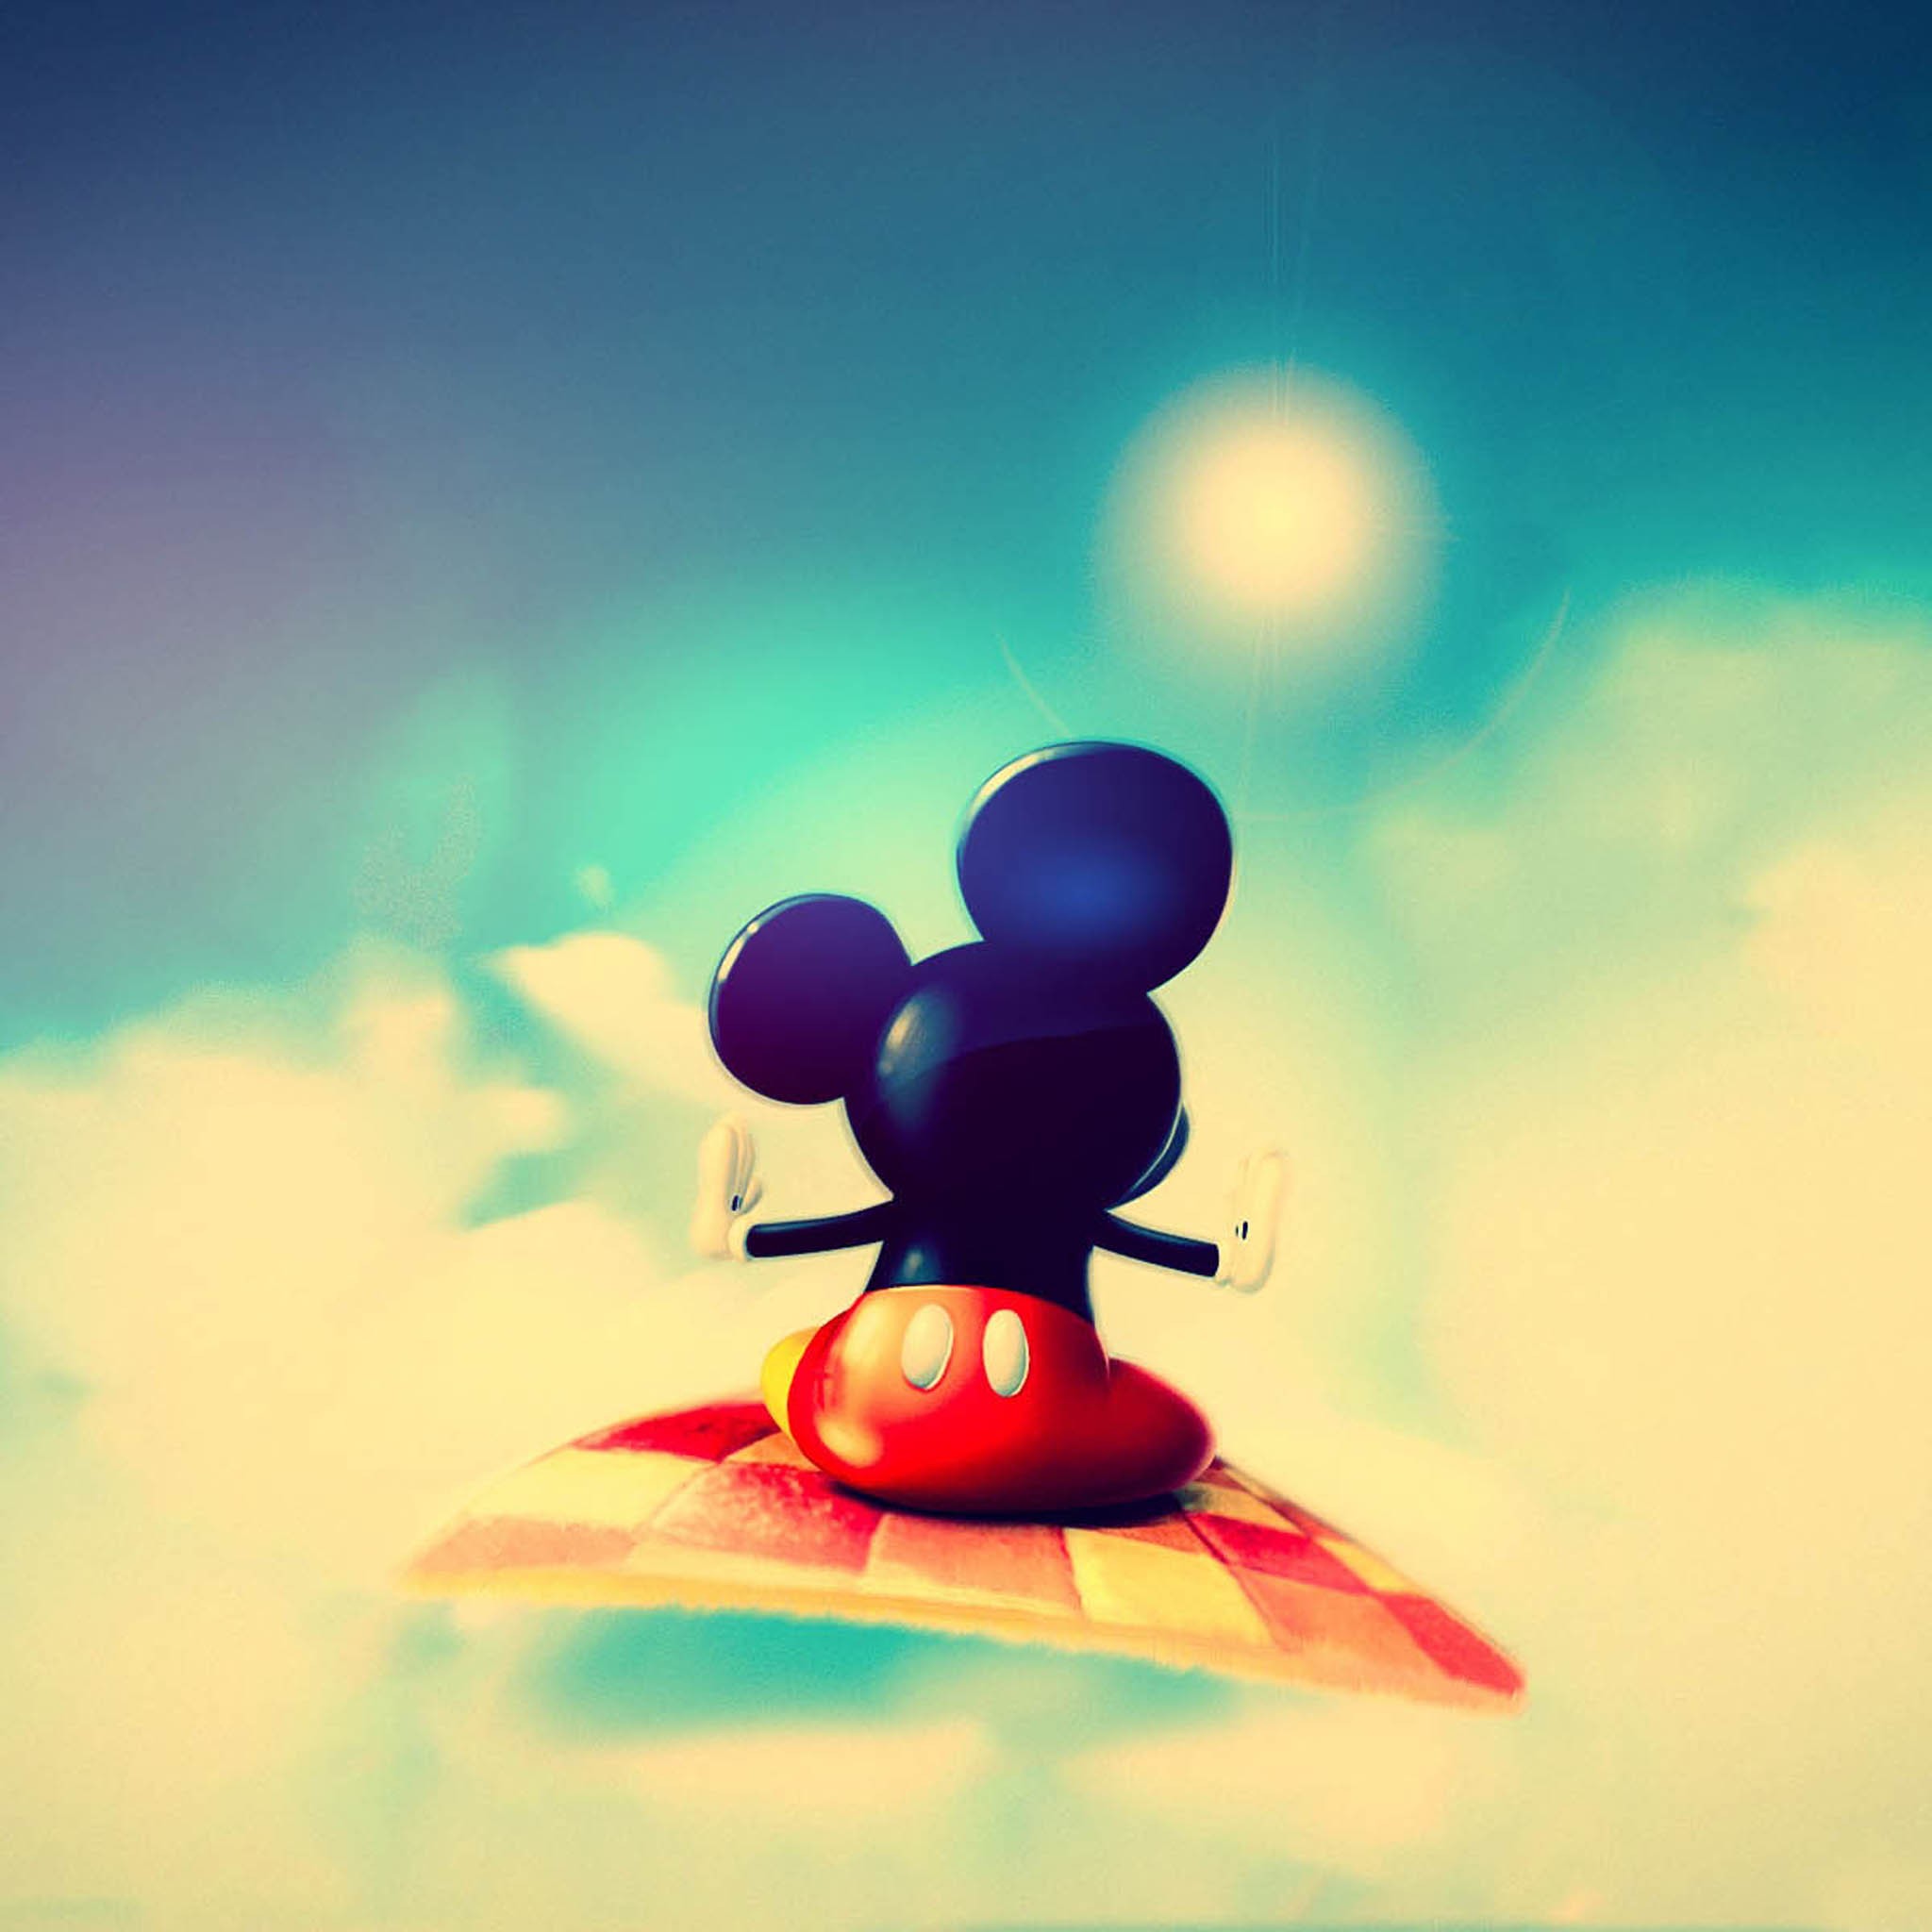 Mickey Mouse Live Wallpapers